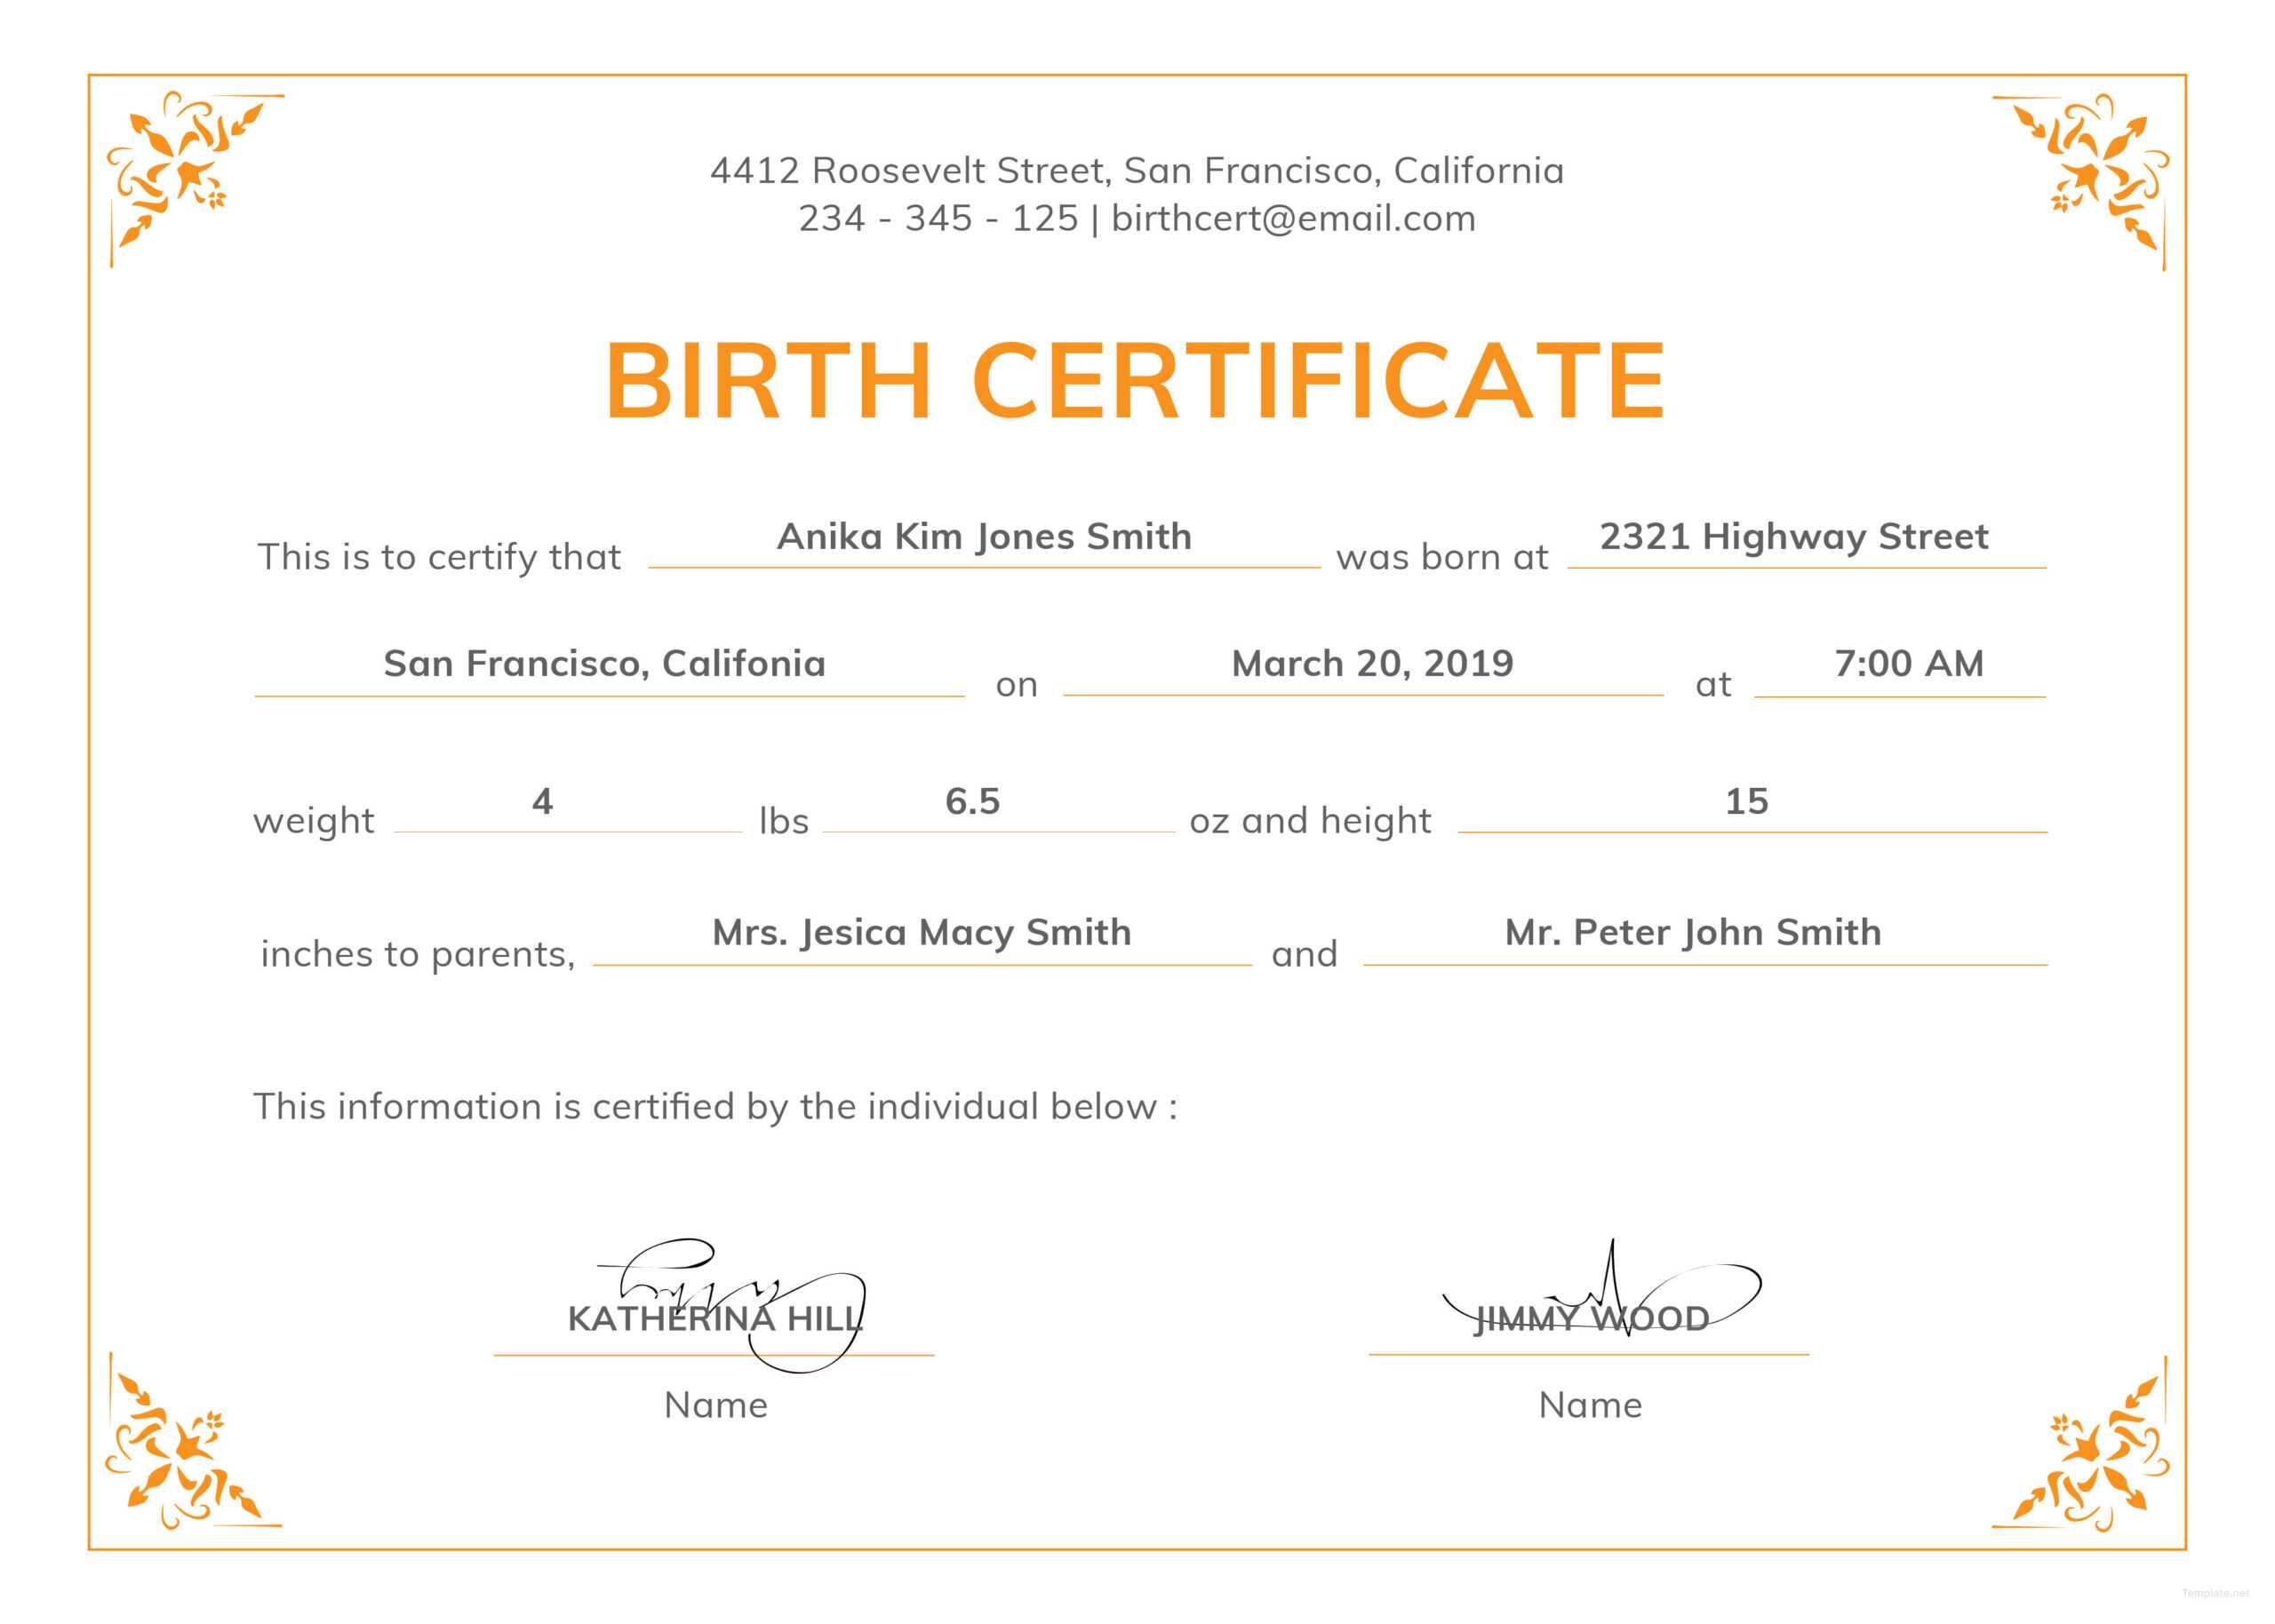 Can Make A Delivery Certificate Crucial | Gift Certificate Throughout Birth Certificate Templates For Word